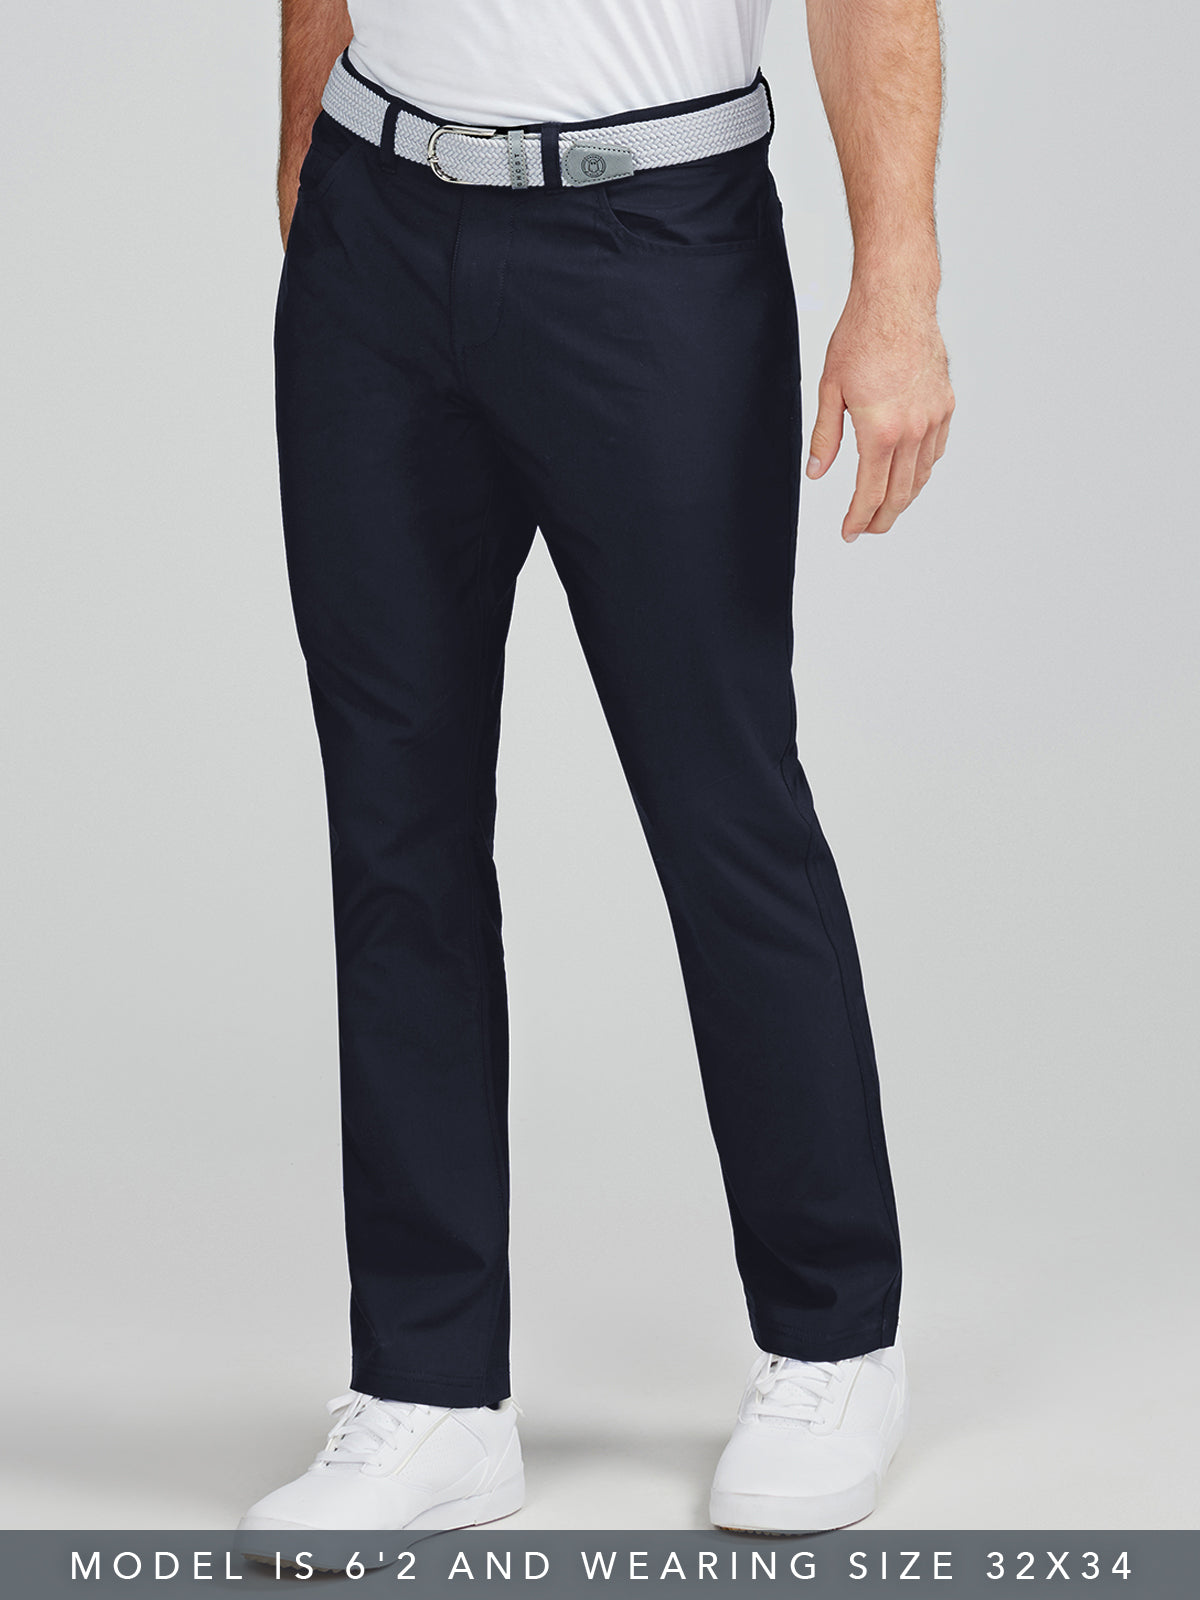 Motion Pant - Straight Fit tasc performance (ClassicNavy)